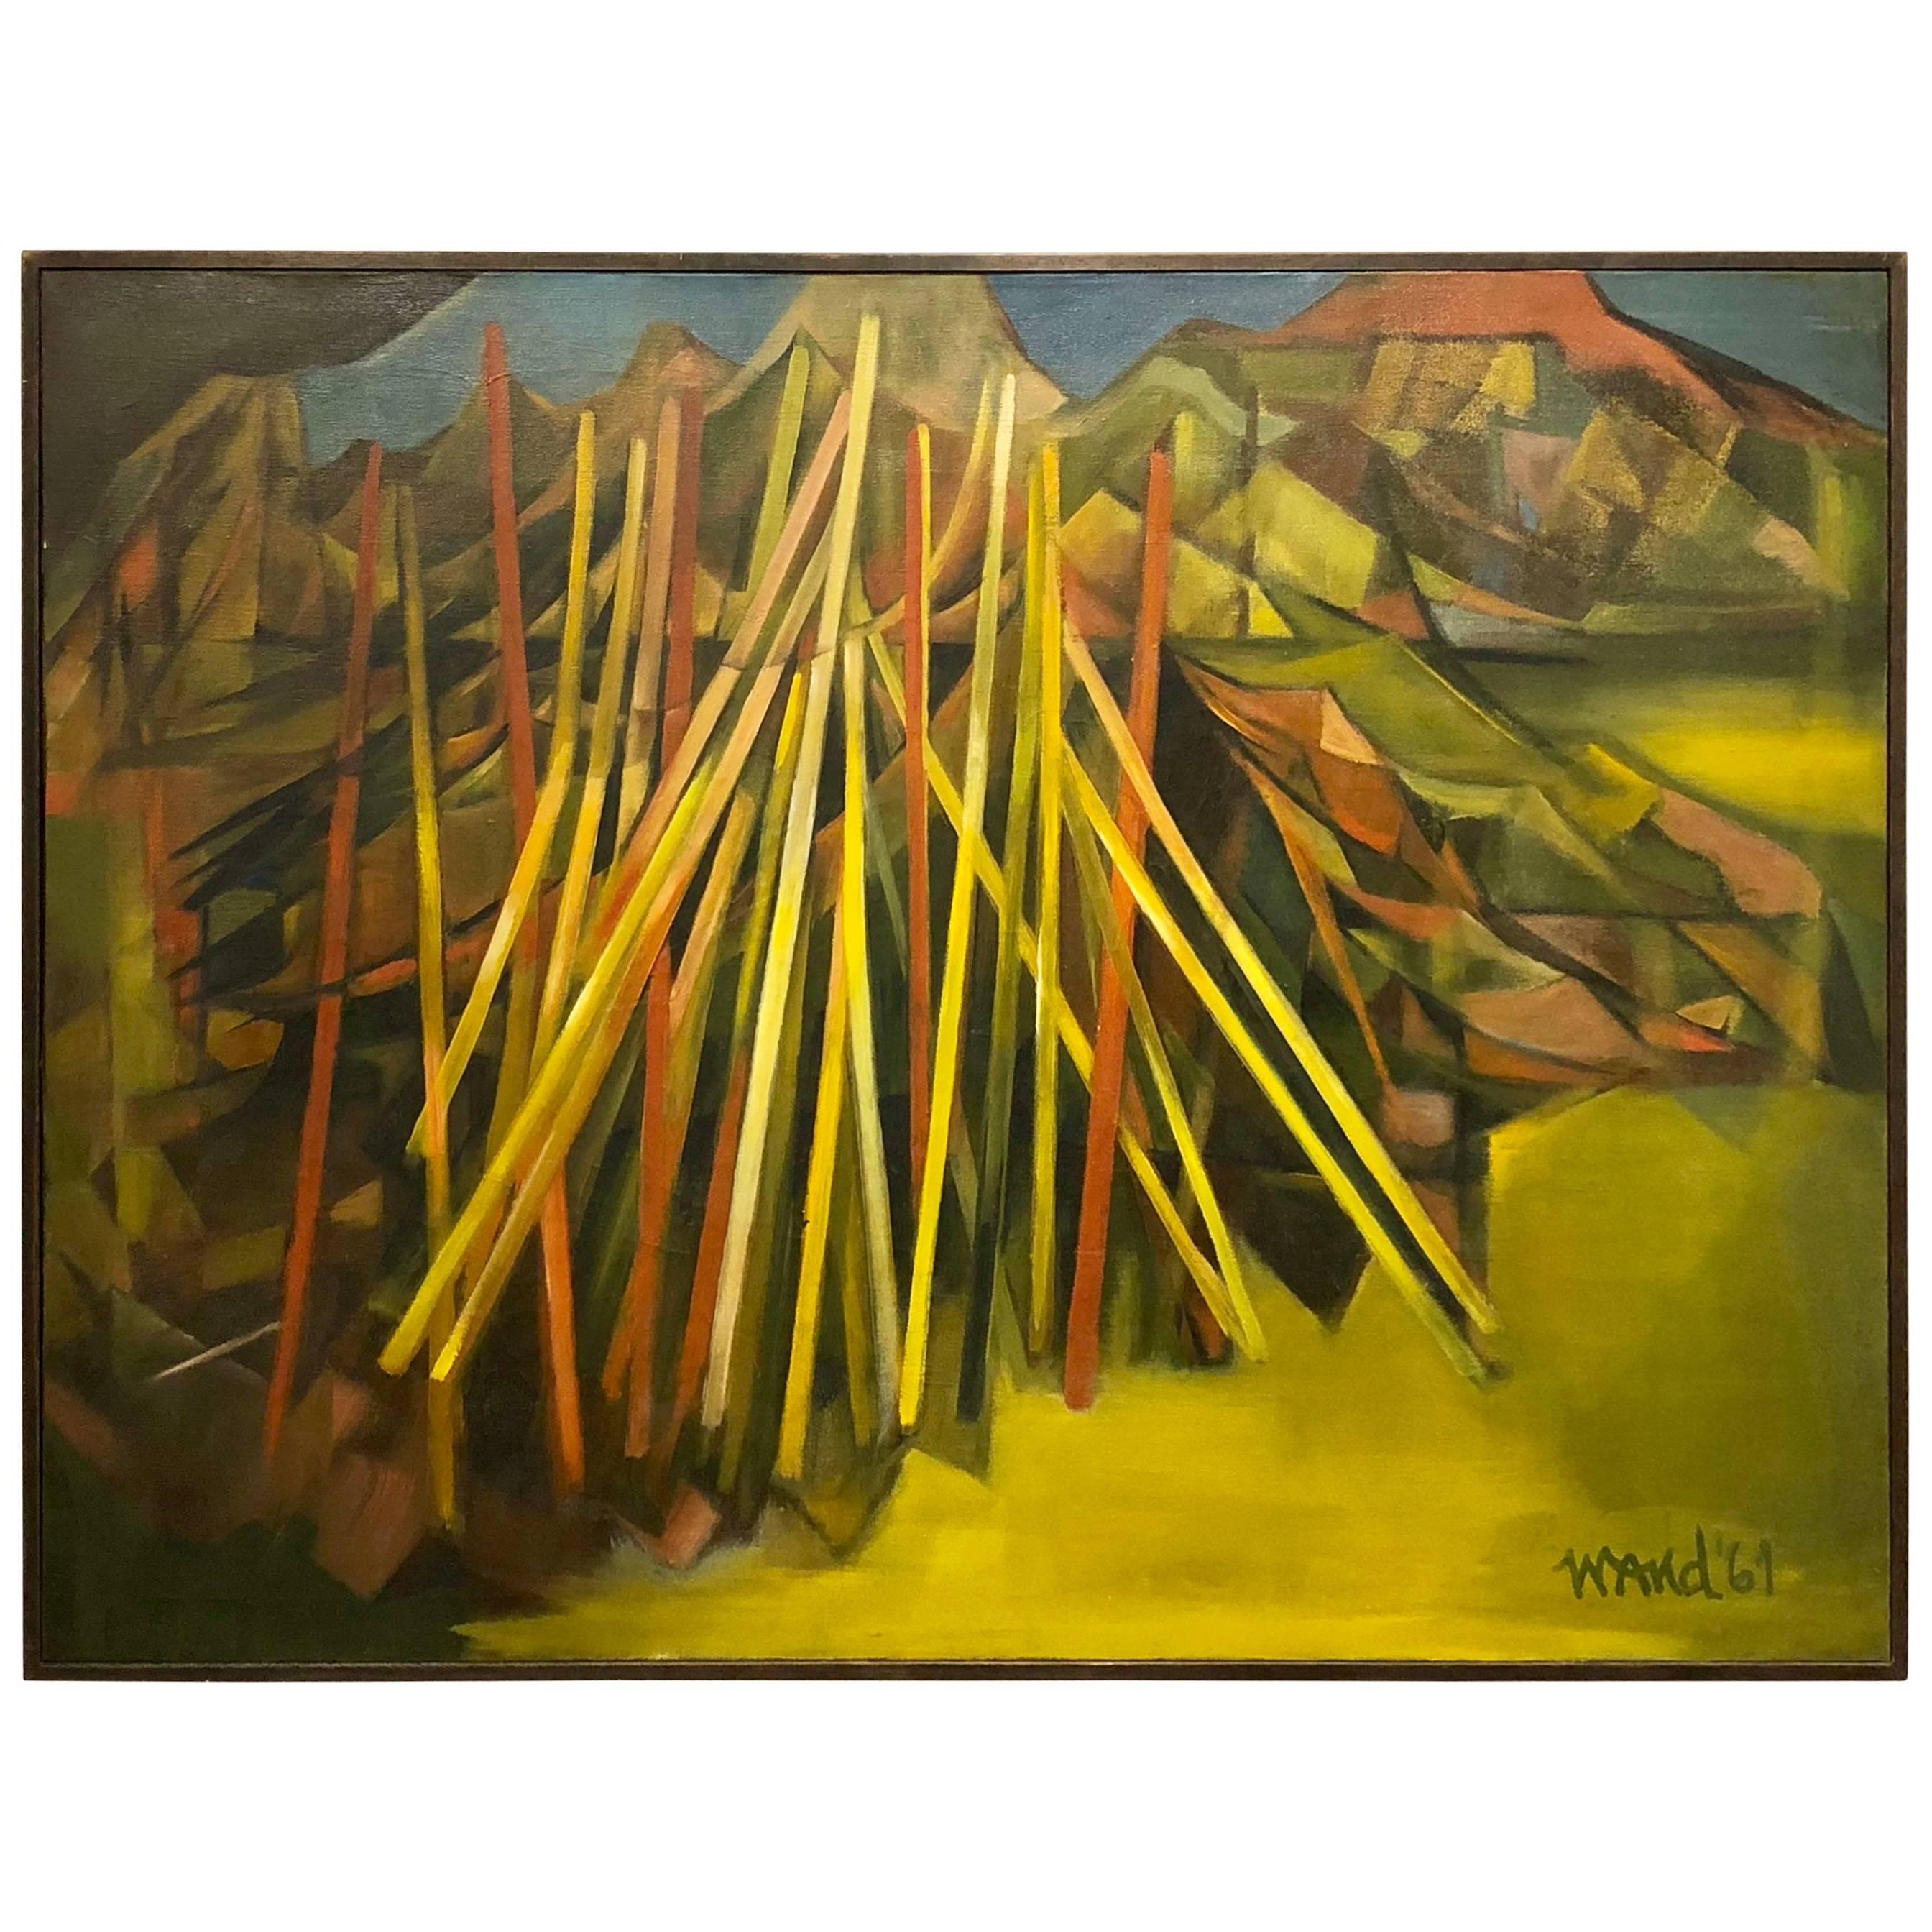 Striking Abstract Large Oil on Canvas Signed by Wand, 1961